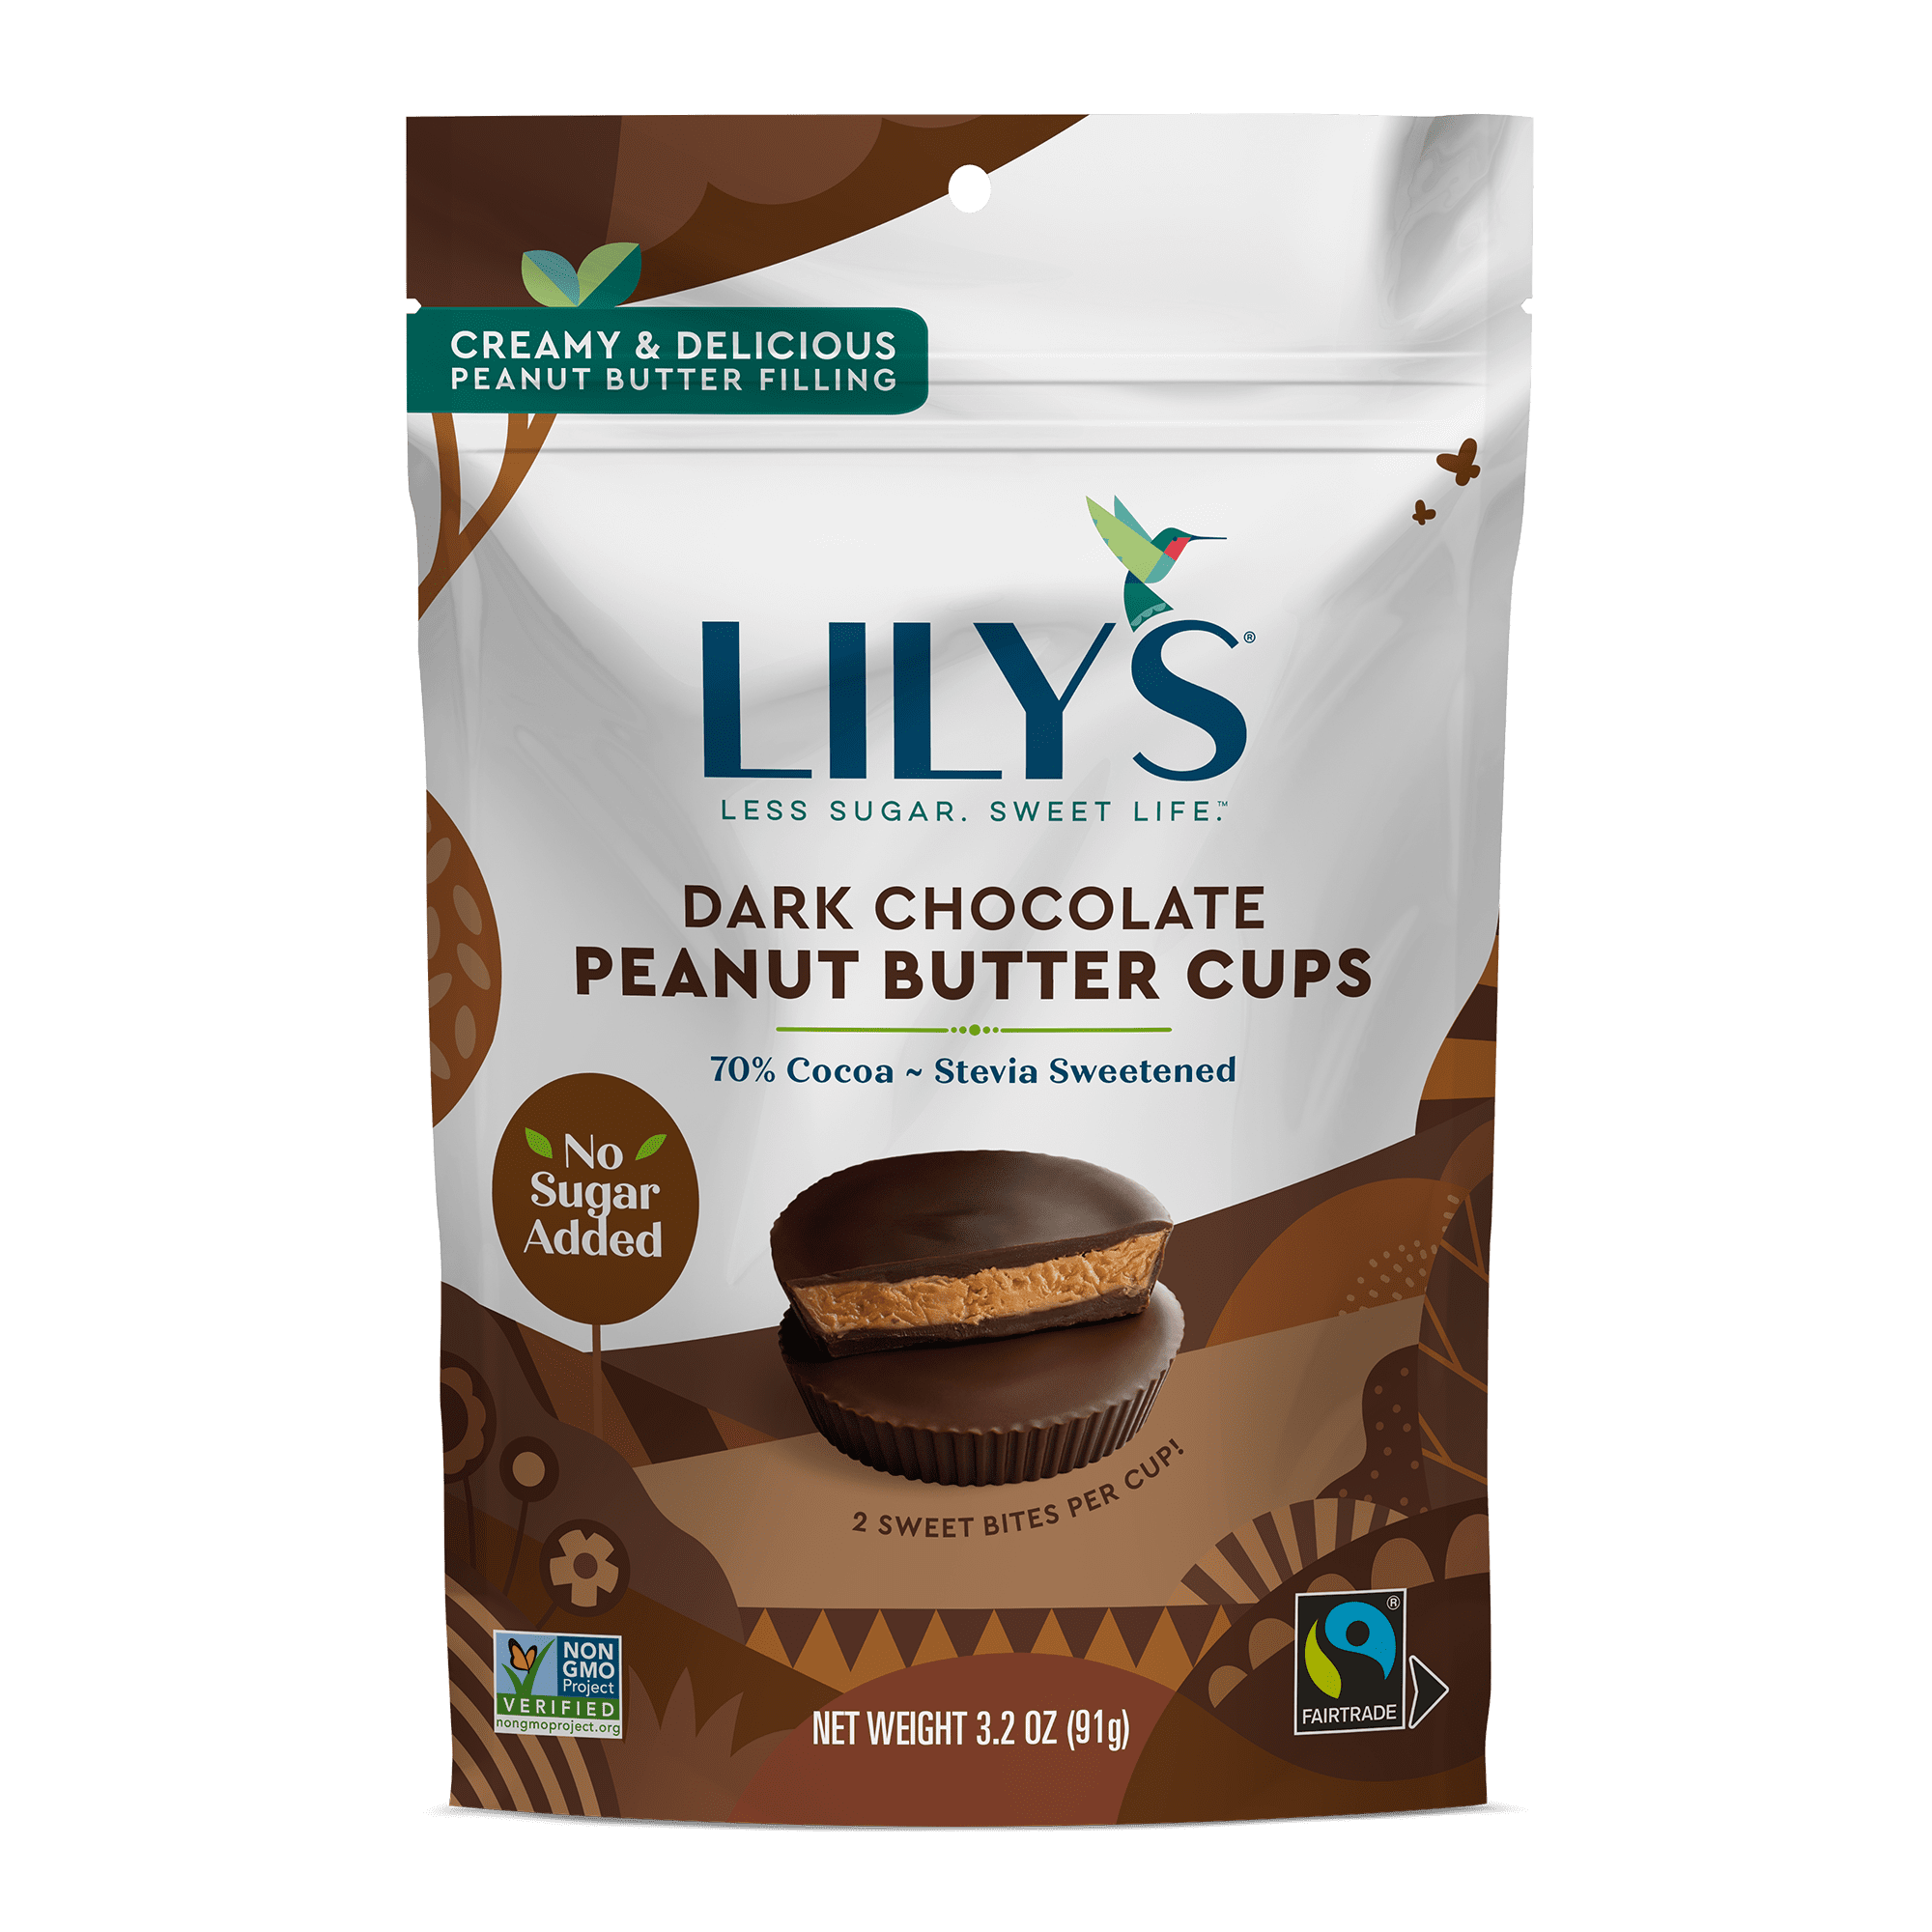 Lily's Dark Chocolate Peanut Butter Cups - 3.2 oz